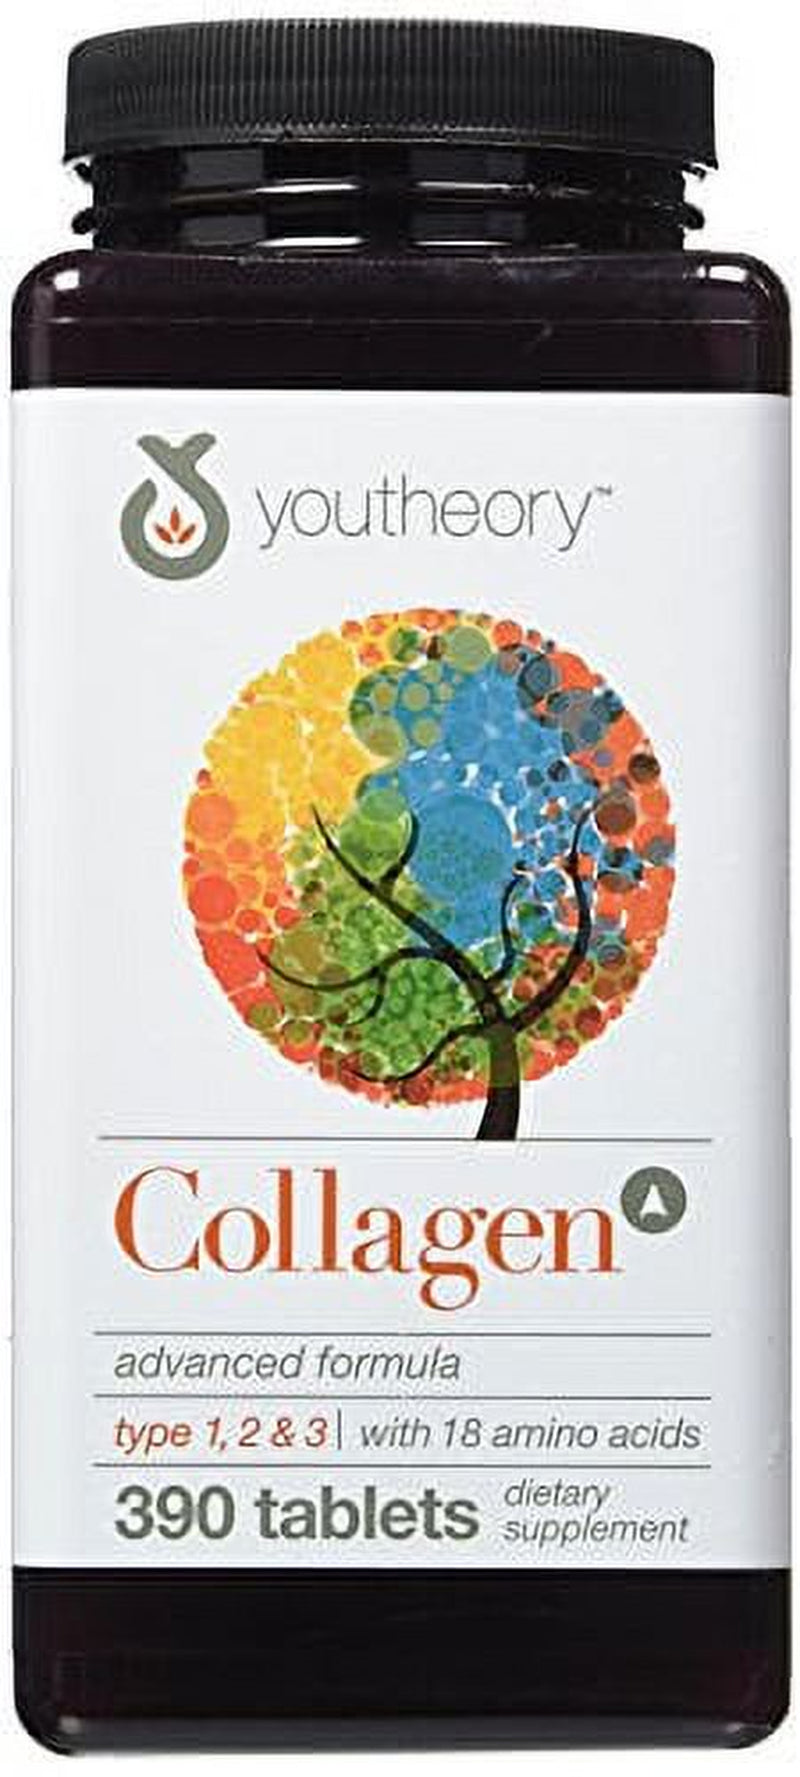 Youtheory Collagen Advanced Formula Tablets - 390 Ct